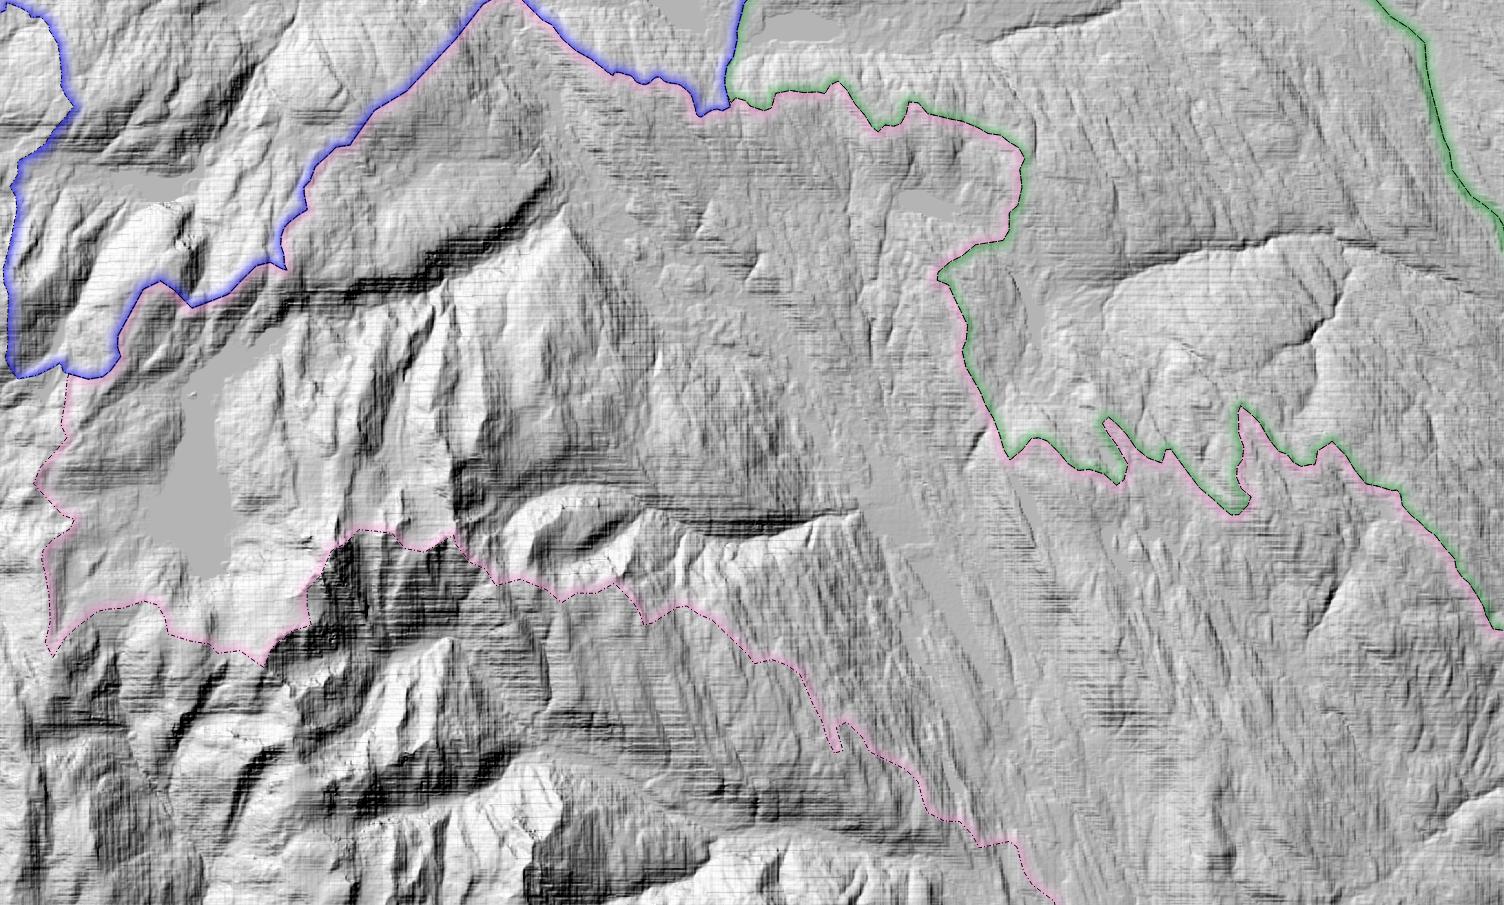 060_hillshade produced with QGIS Save As